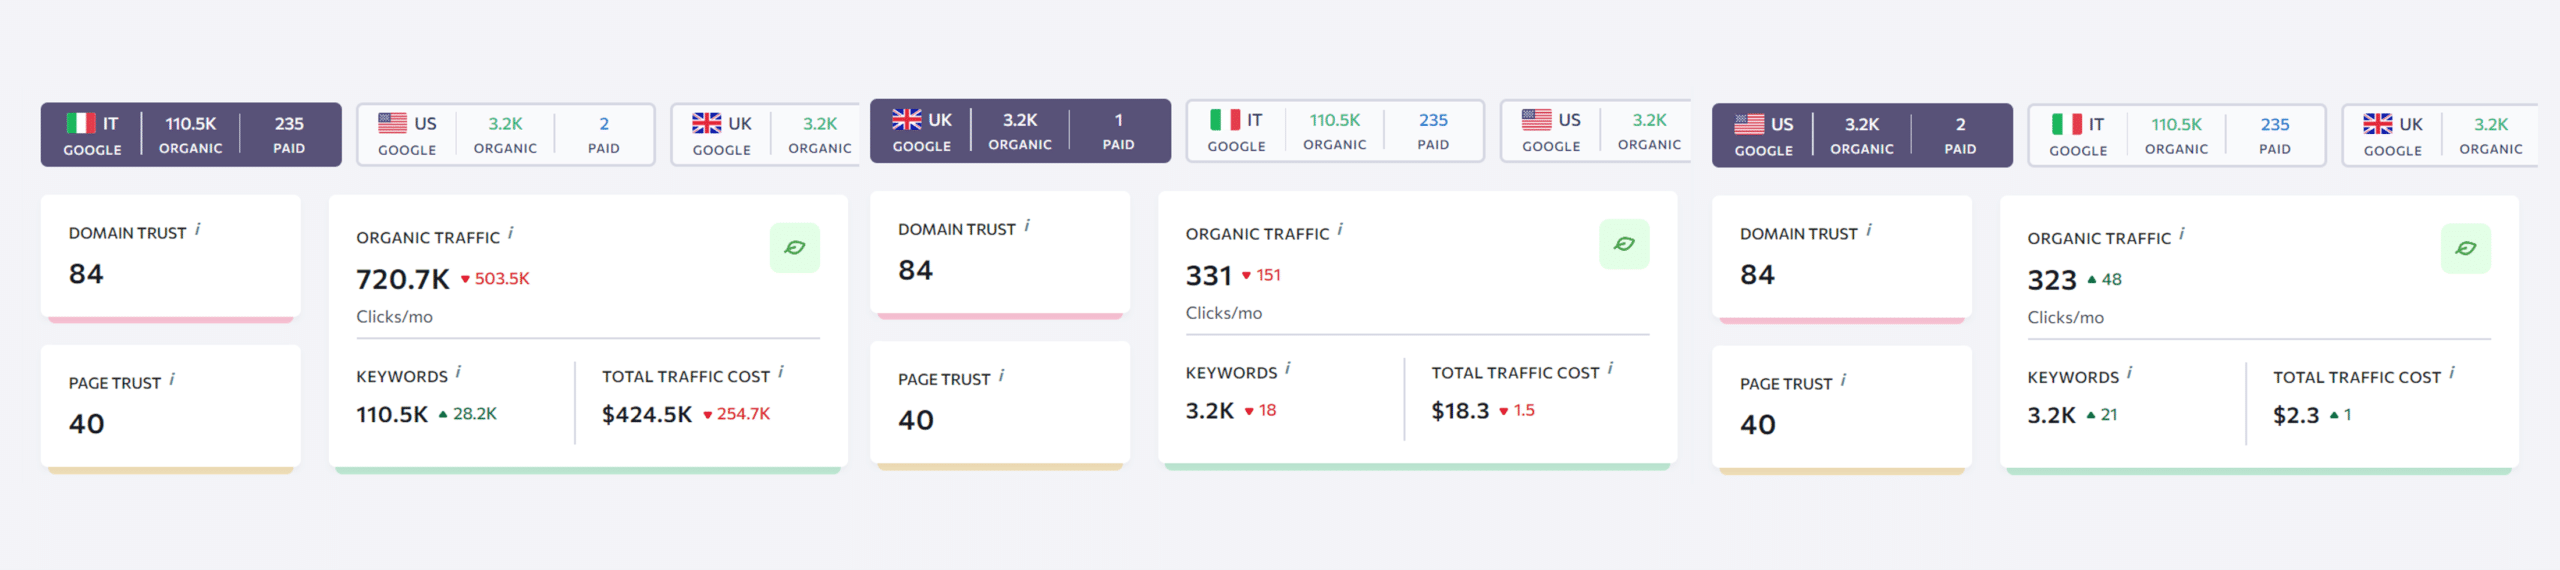 website traffic from different countries changes